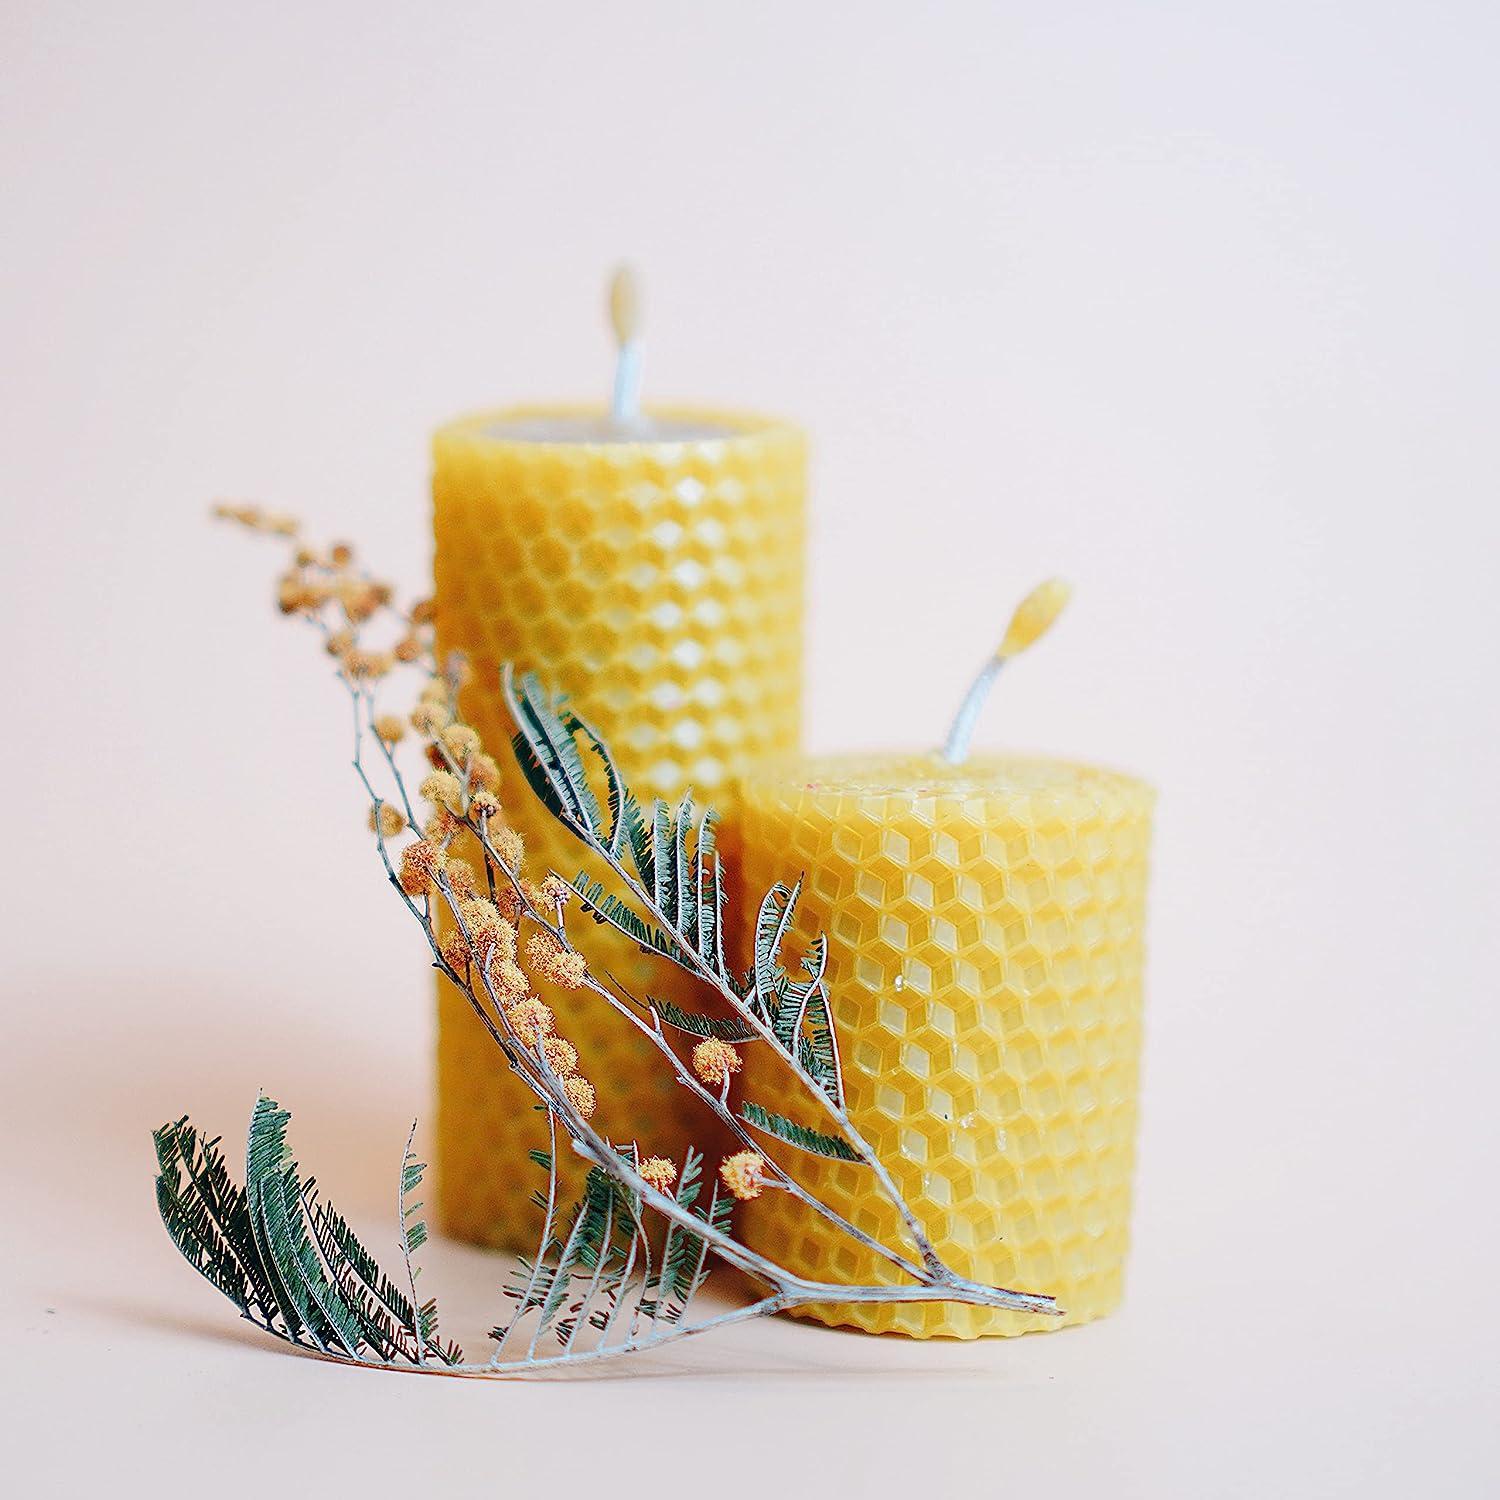 Kids Candle Making Kit, Pure Beeswax Candles